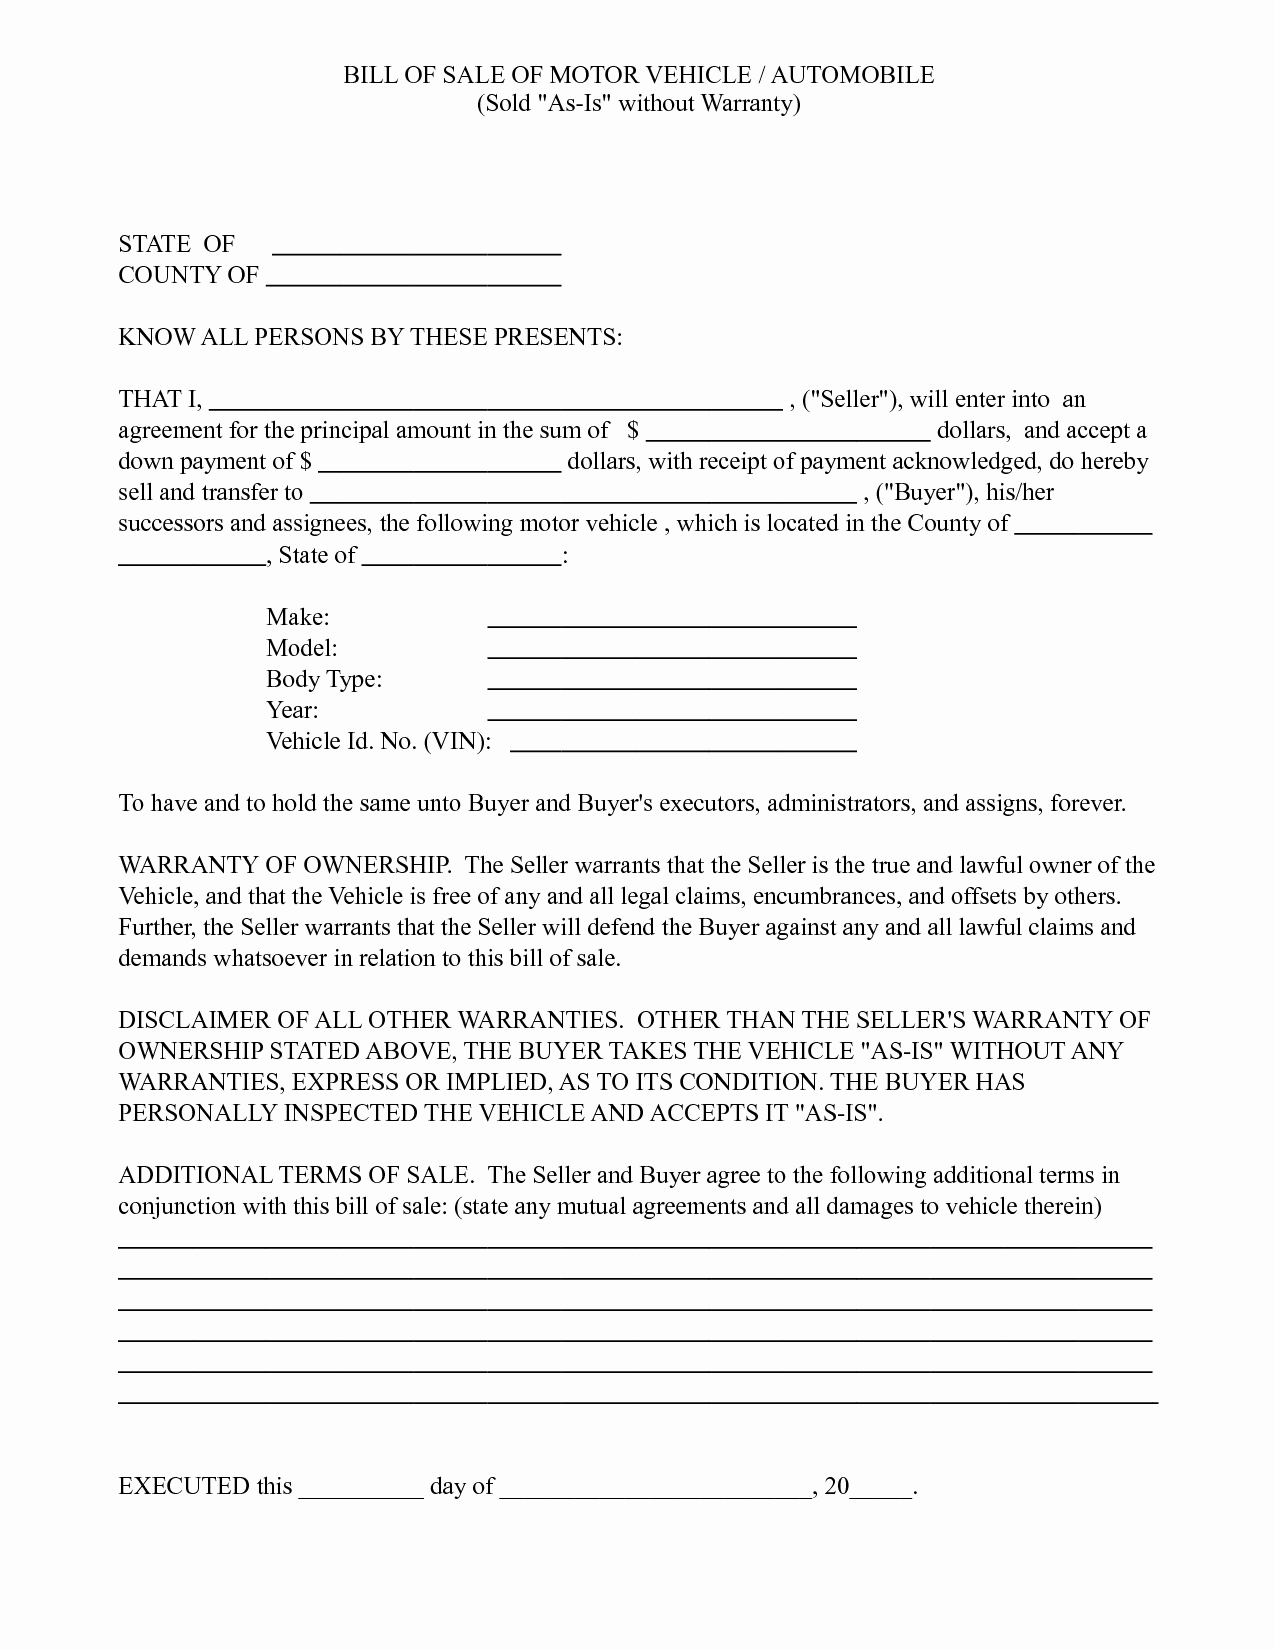 Bill Of Sale Contract Template Fresh Motorcycle Purchase Agreement